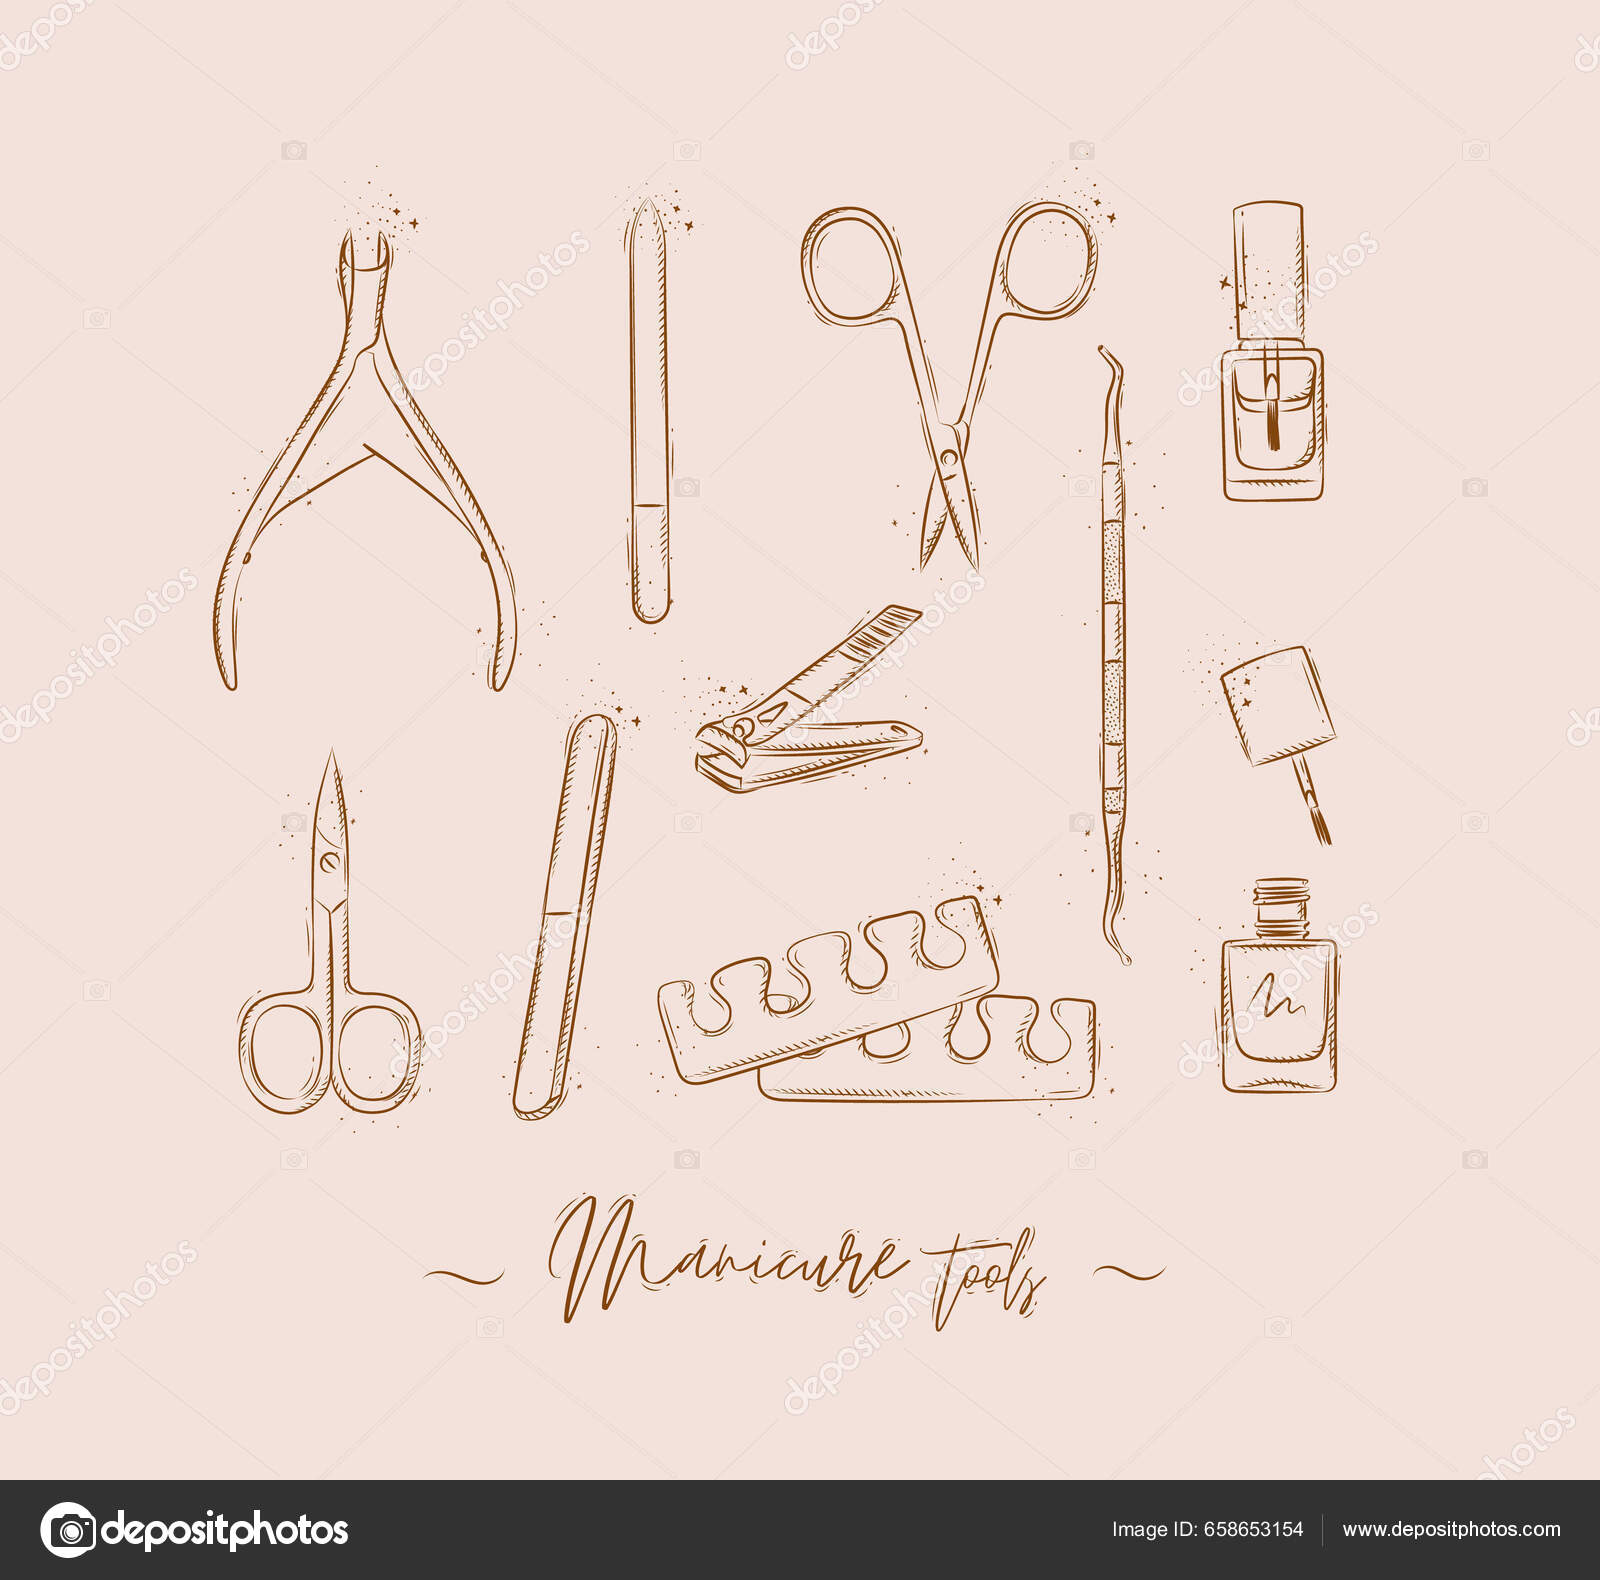 Manicure tools and accessories a set elements Vector Image